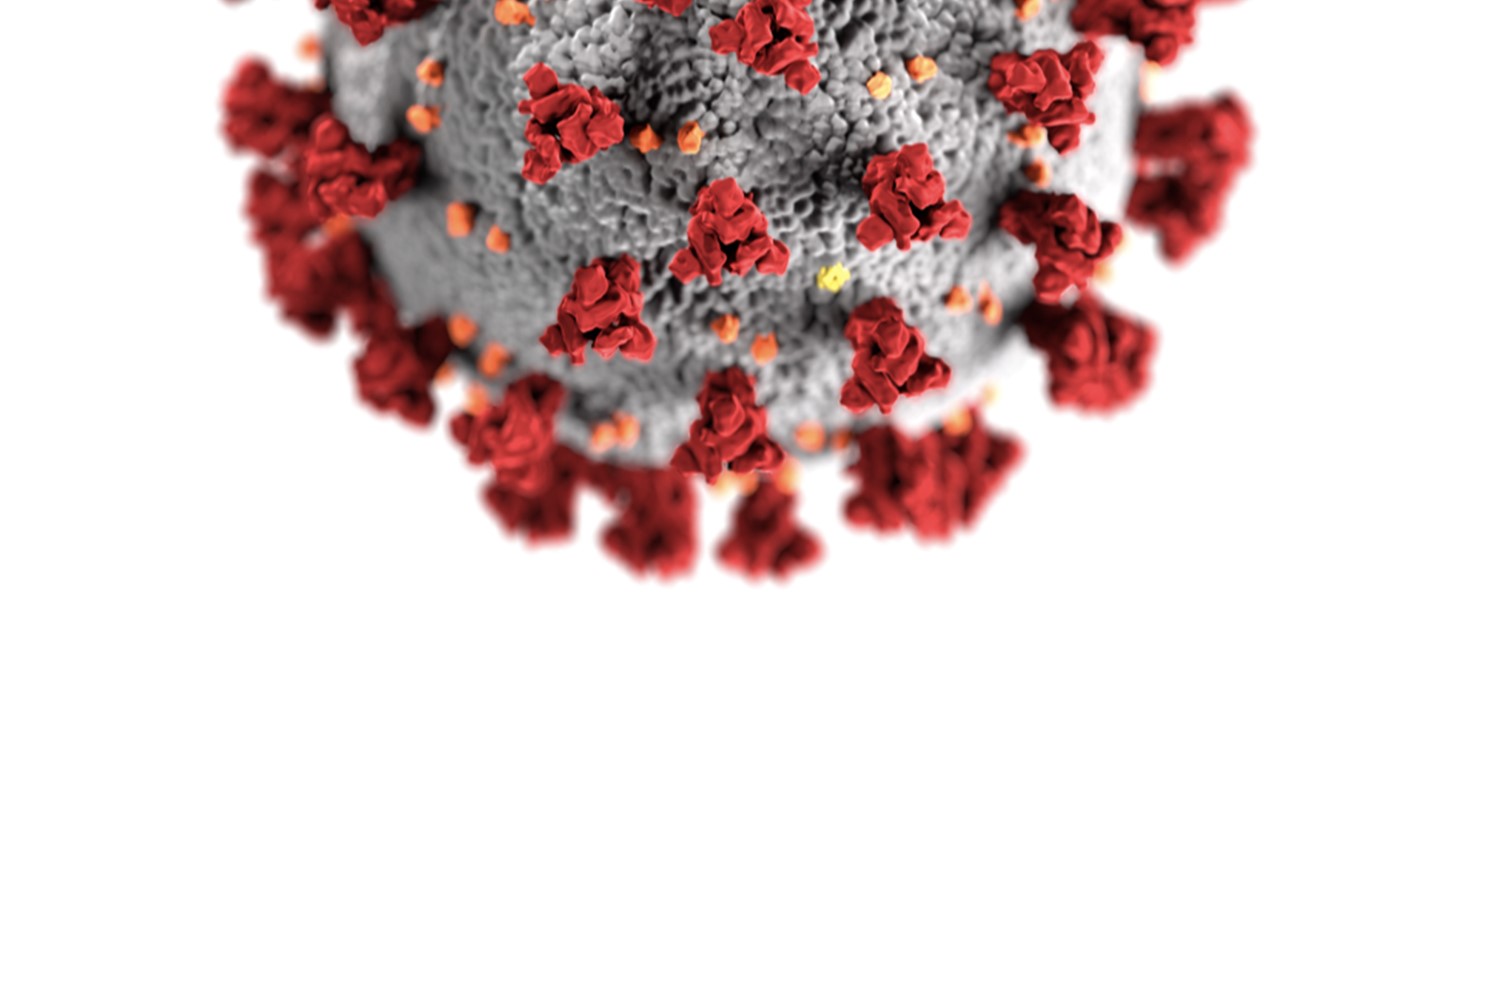 Image of coronavirus for blog article on worksafe practices